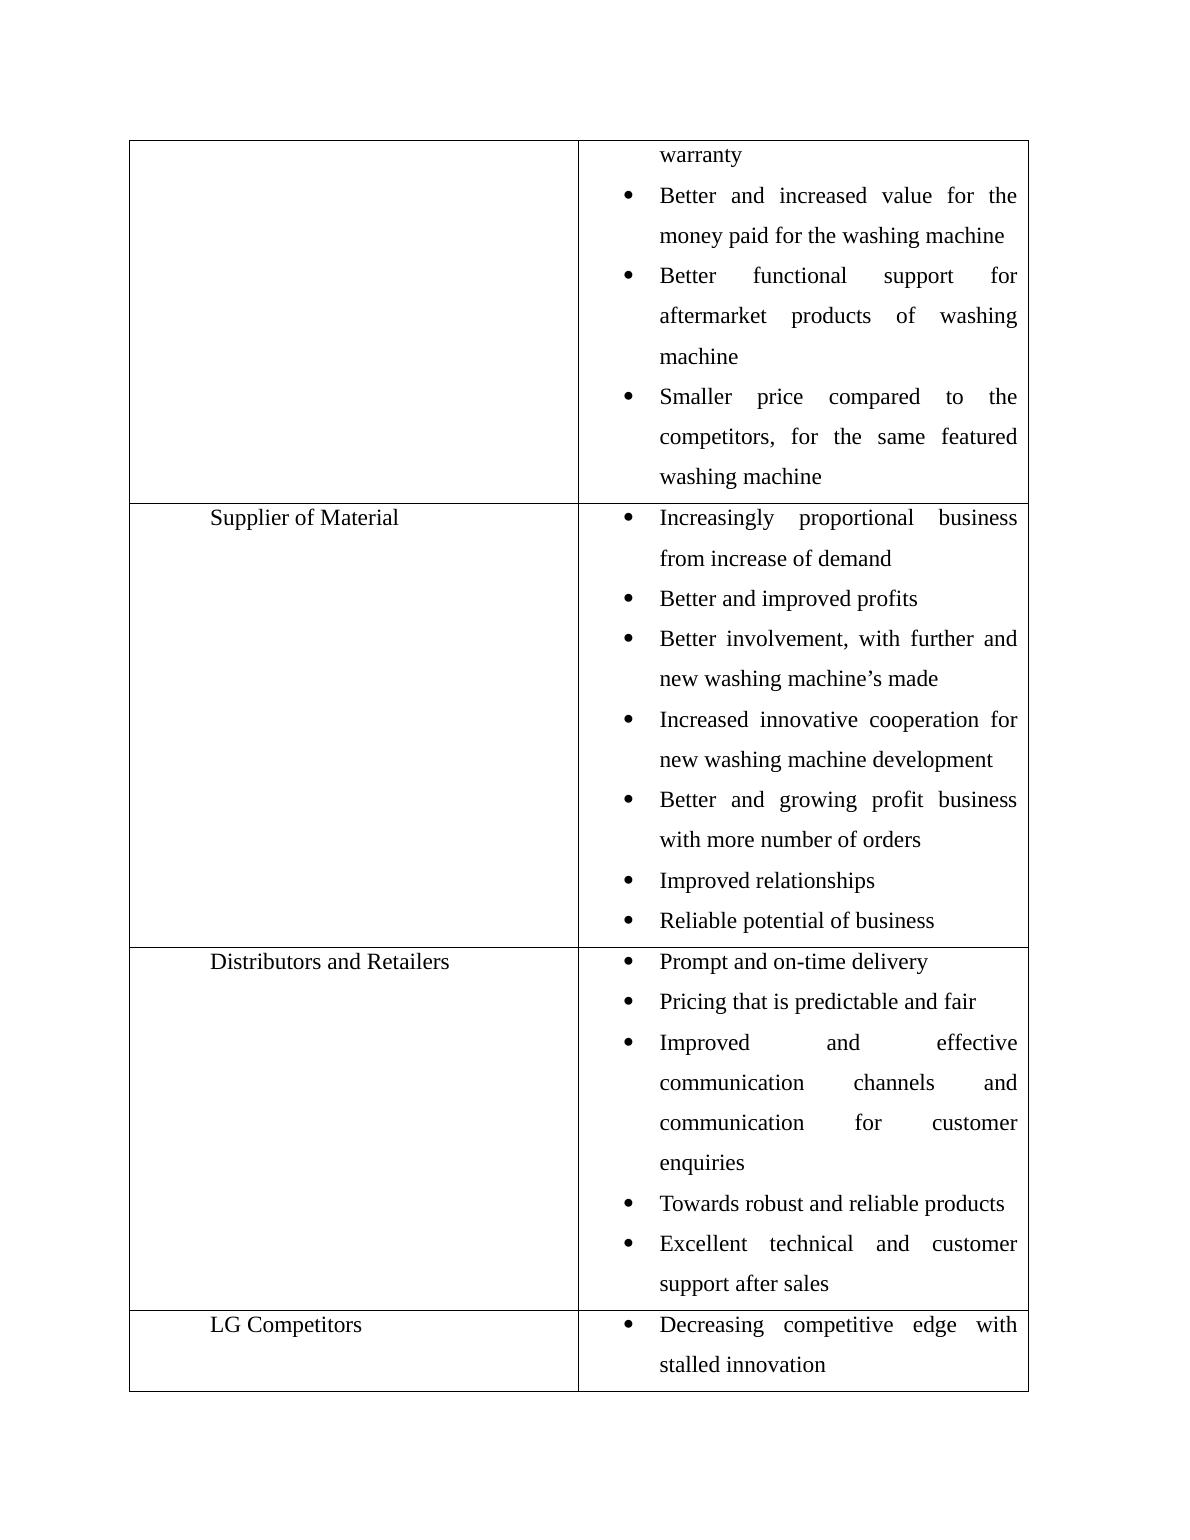 Quality Planning and Analysis - PDF_8